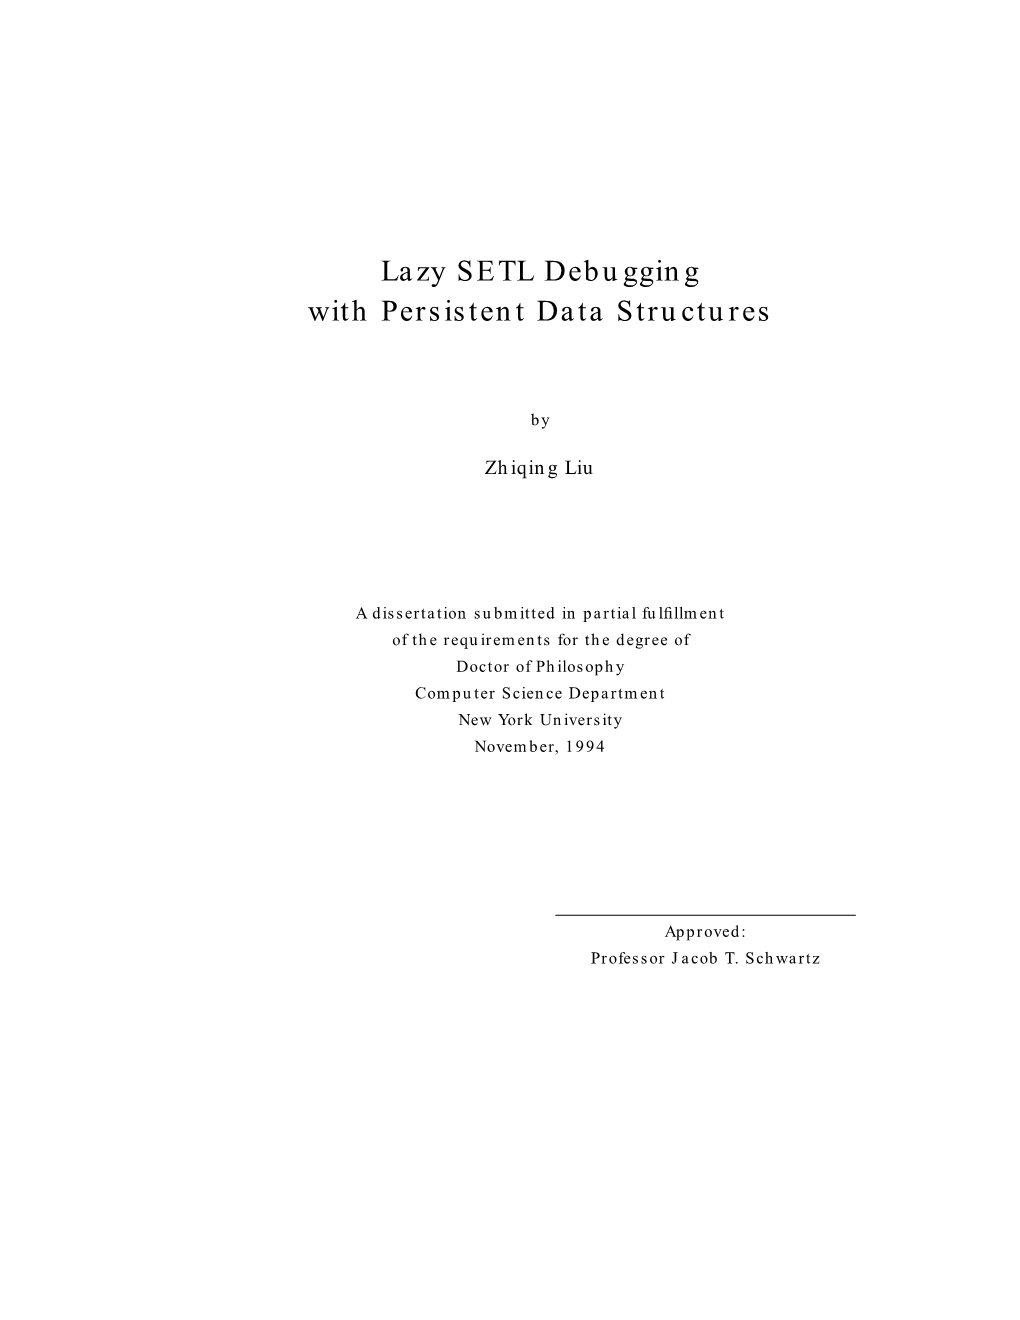 Lazy SETL Debugging with Persistent Data Structures